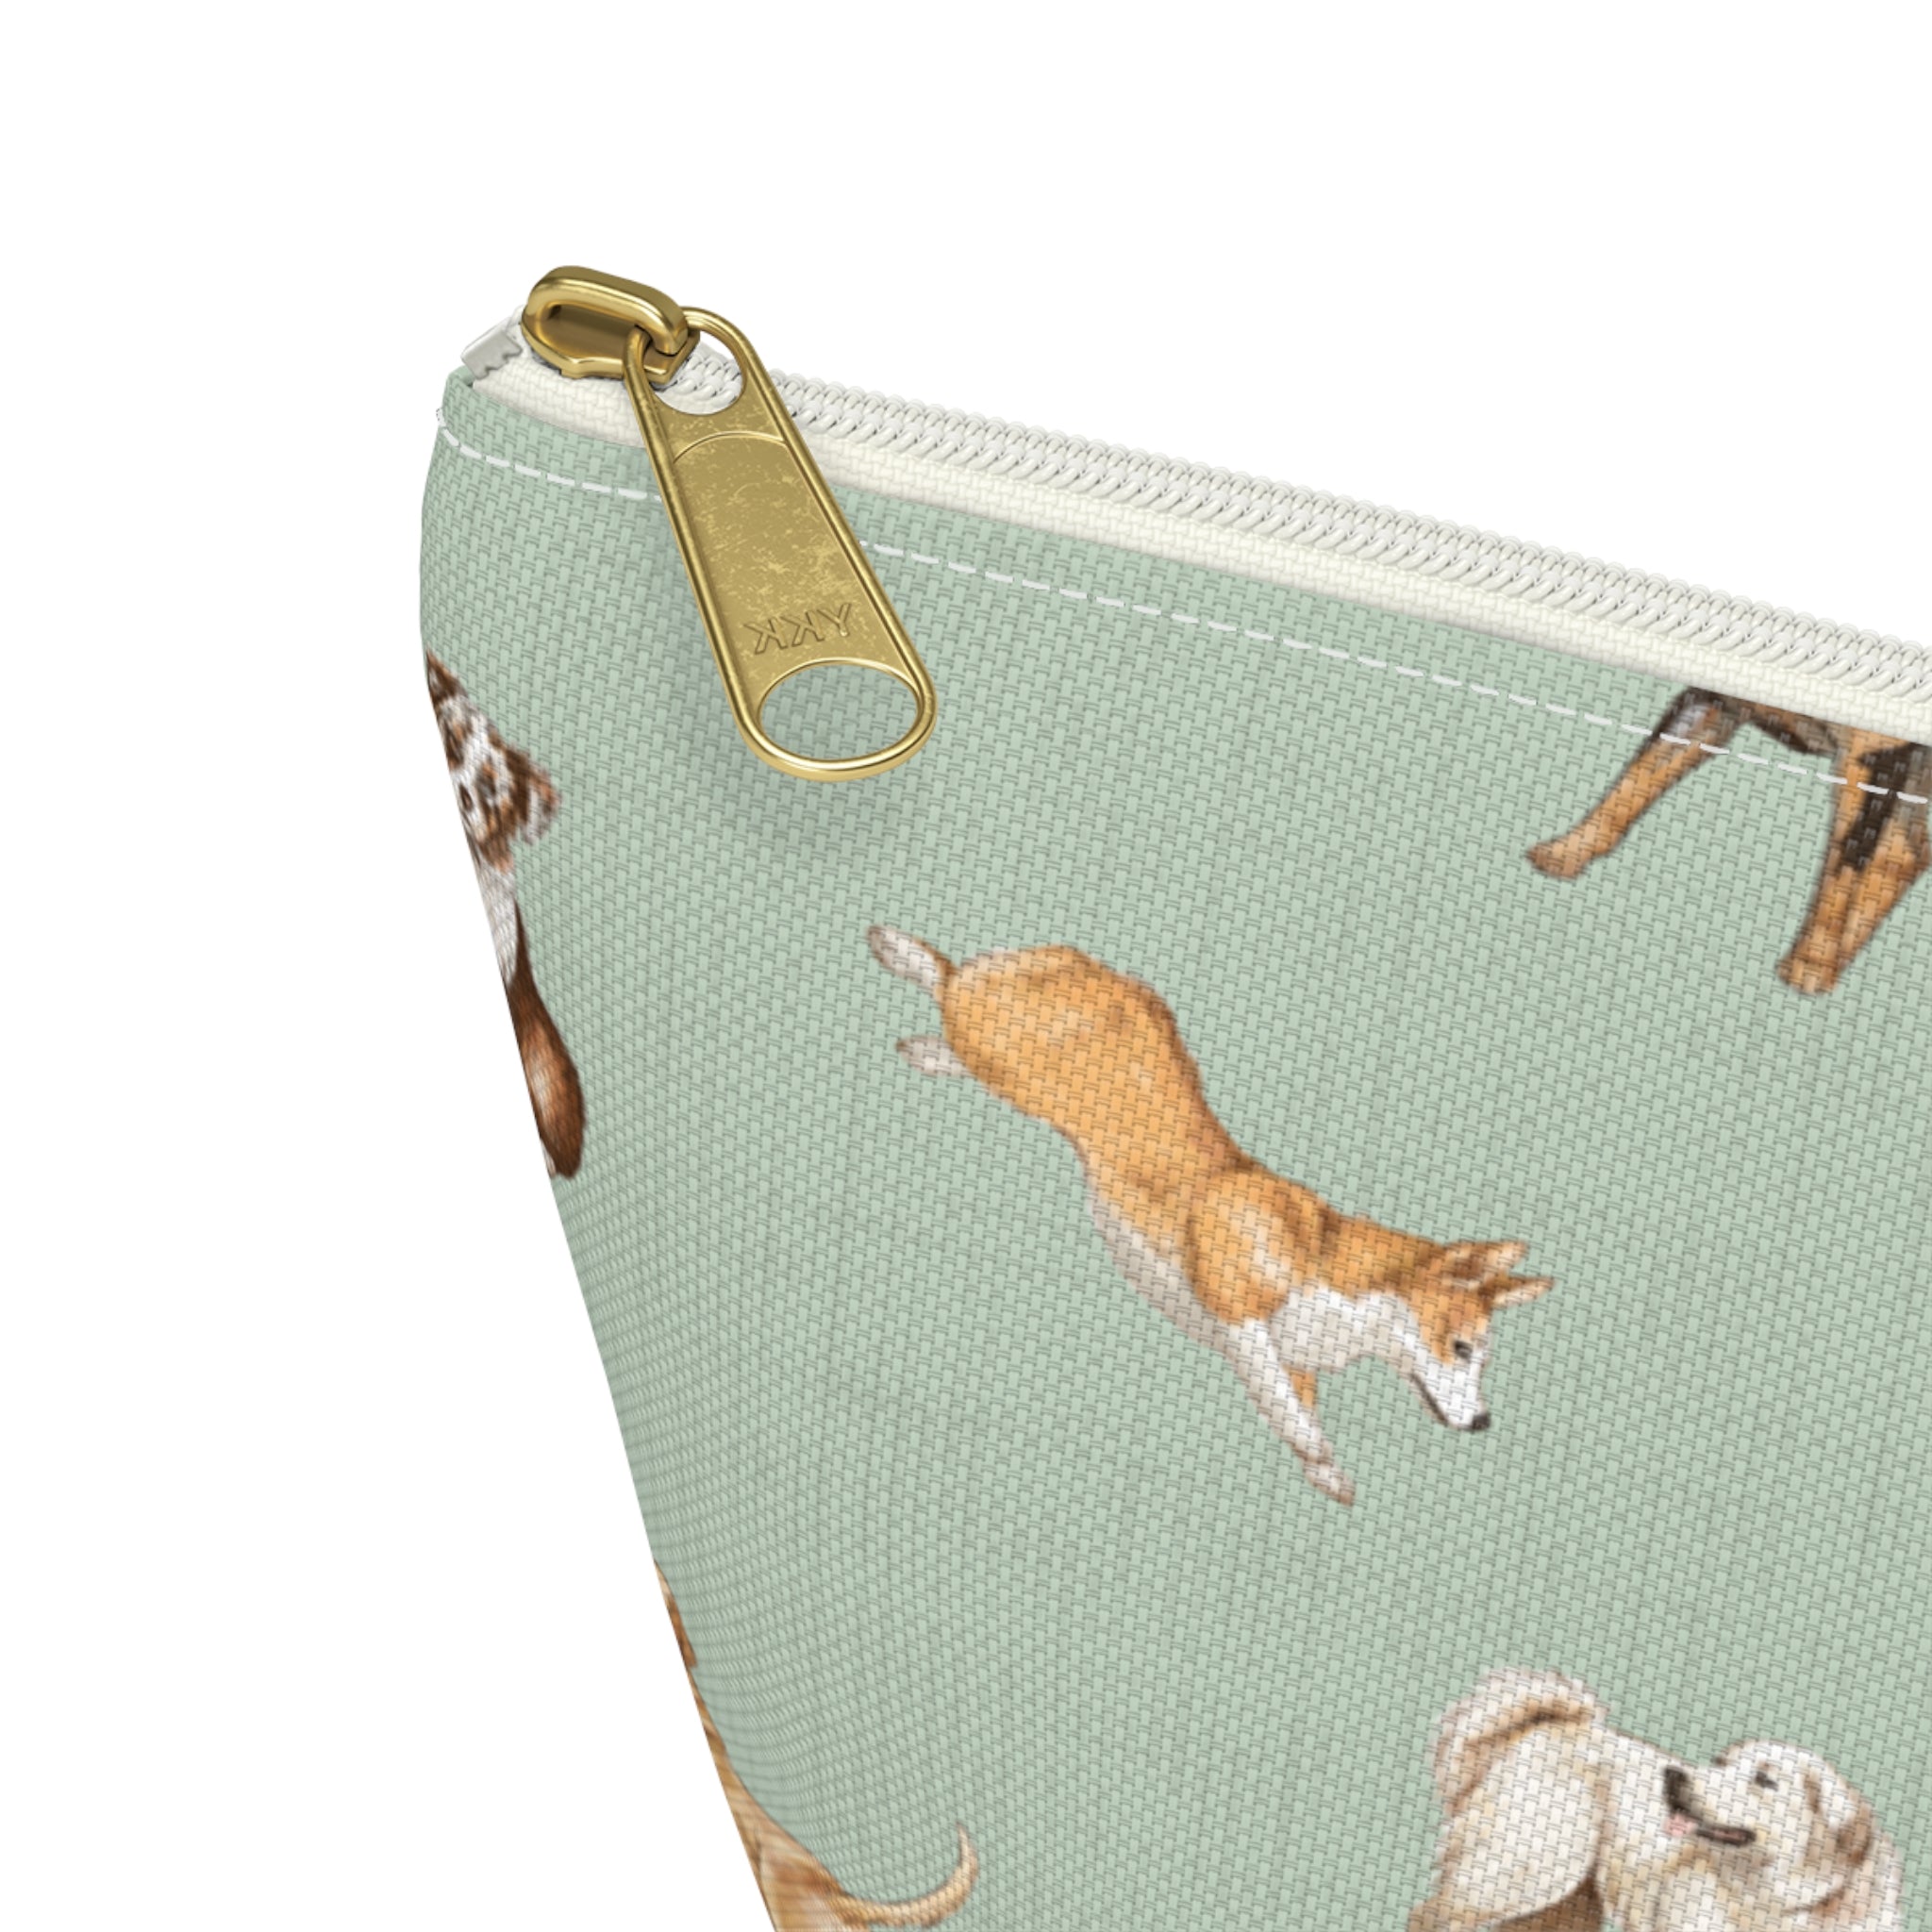 Cow Dogs Pencil Pouch in Mint